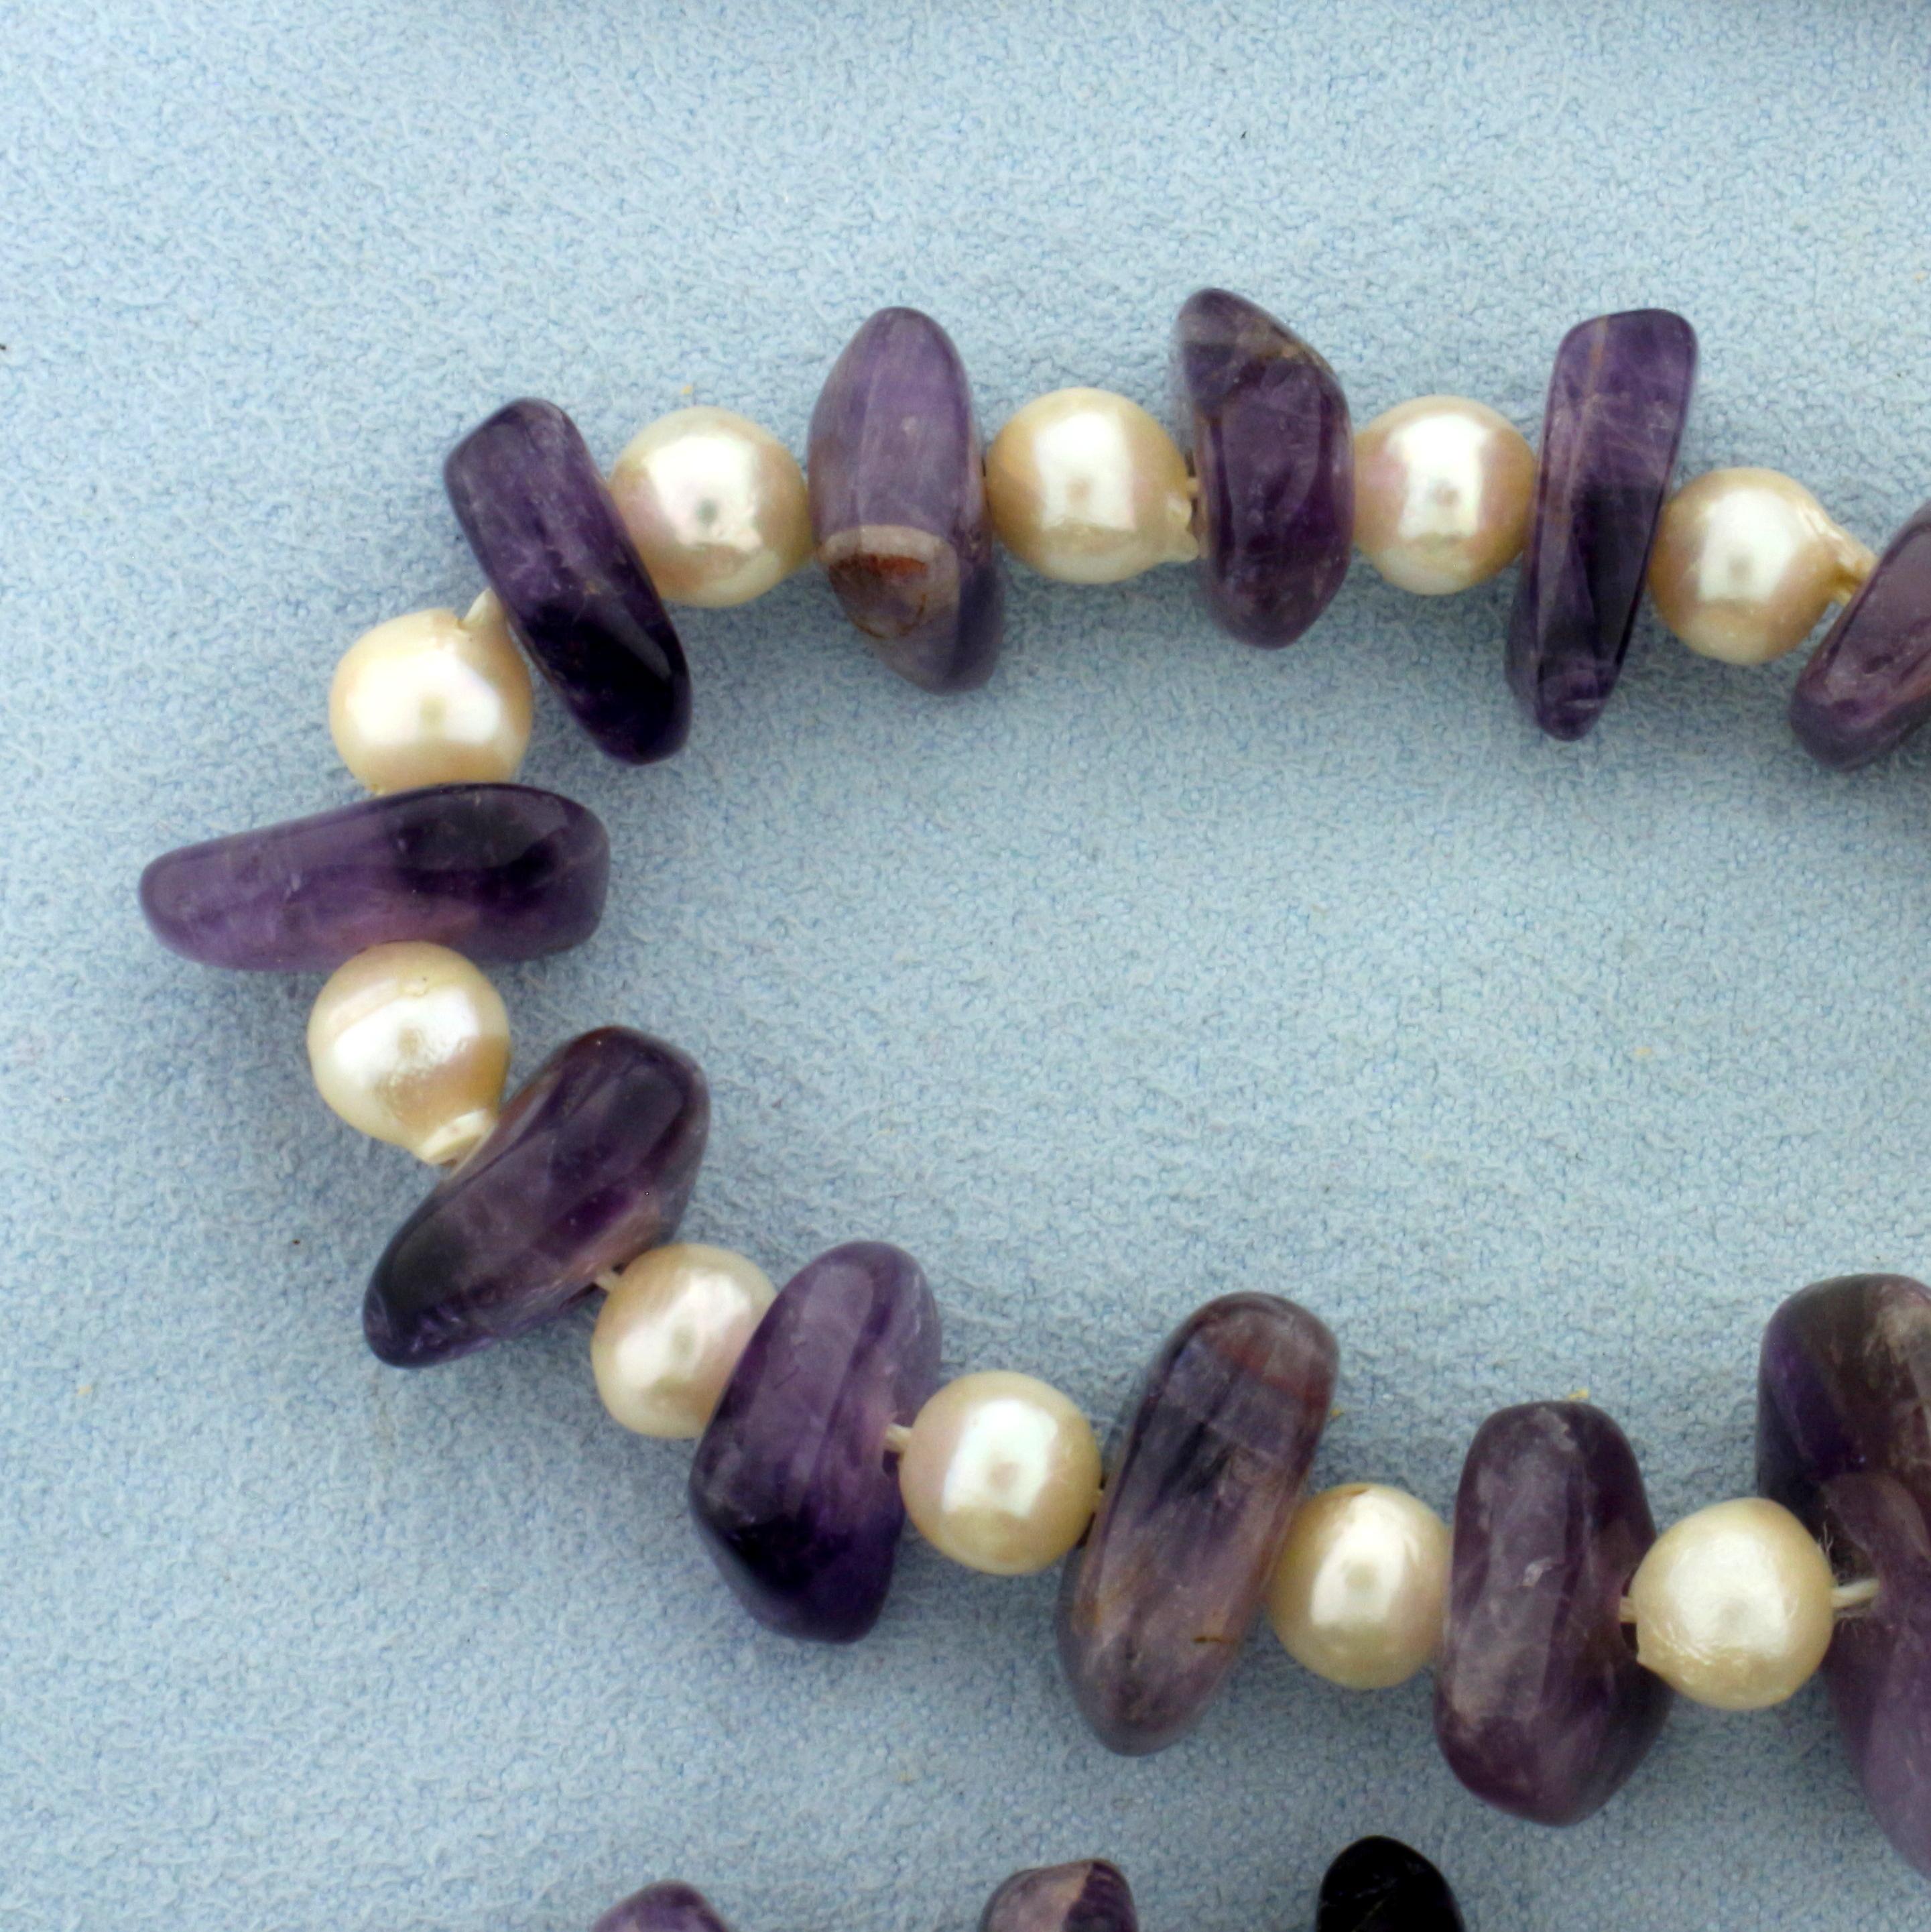 24 Inch Pearl And Amethyst Bead Necklace With 10k Yellow Gold Clasp